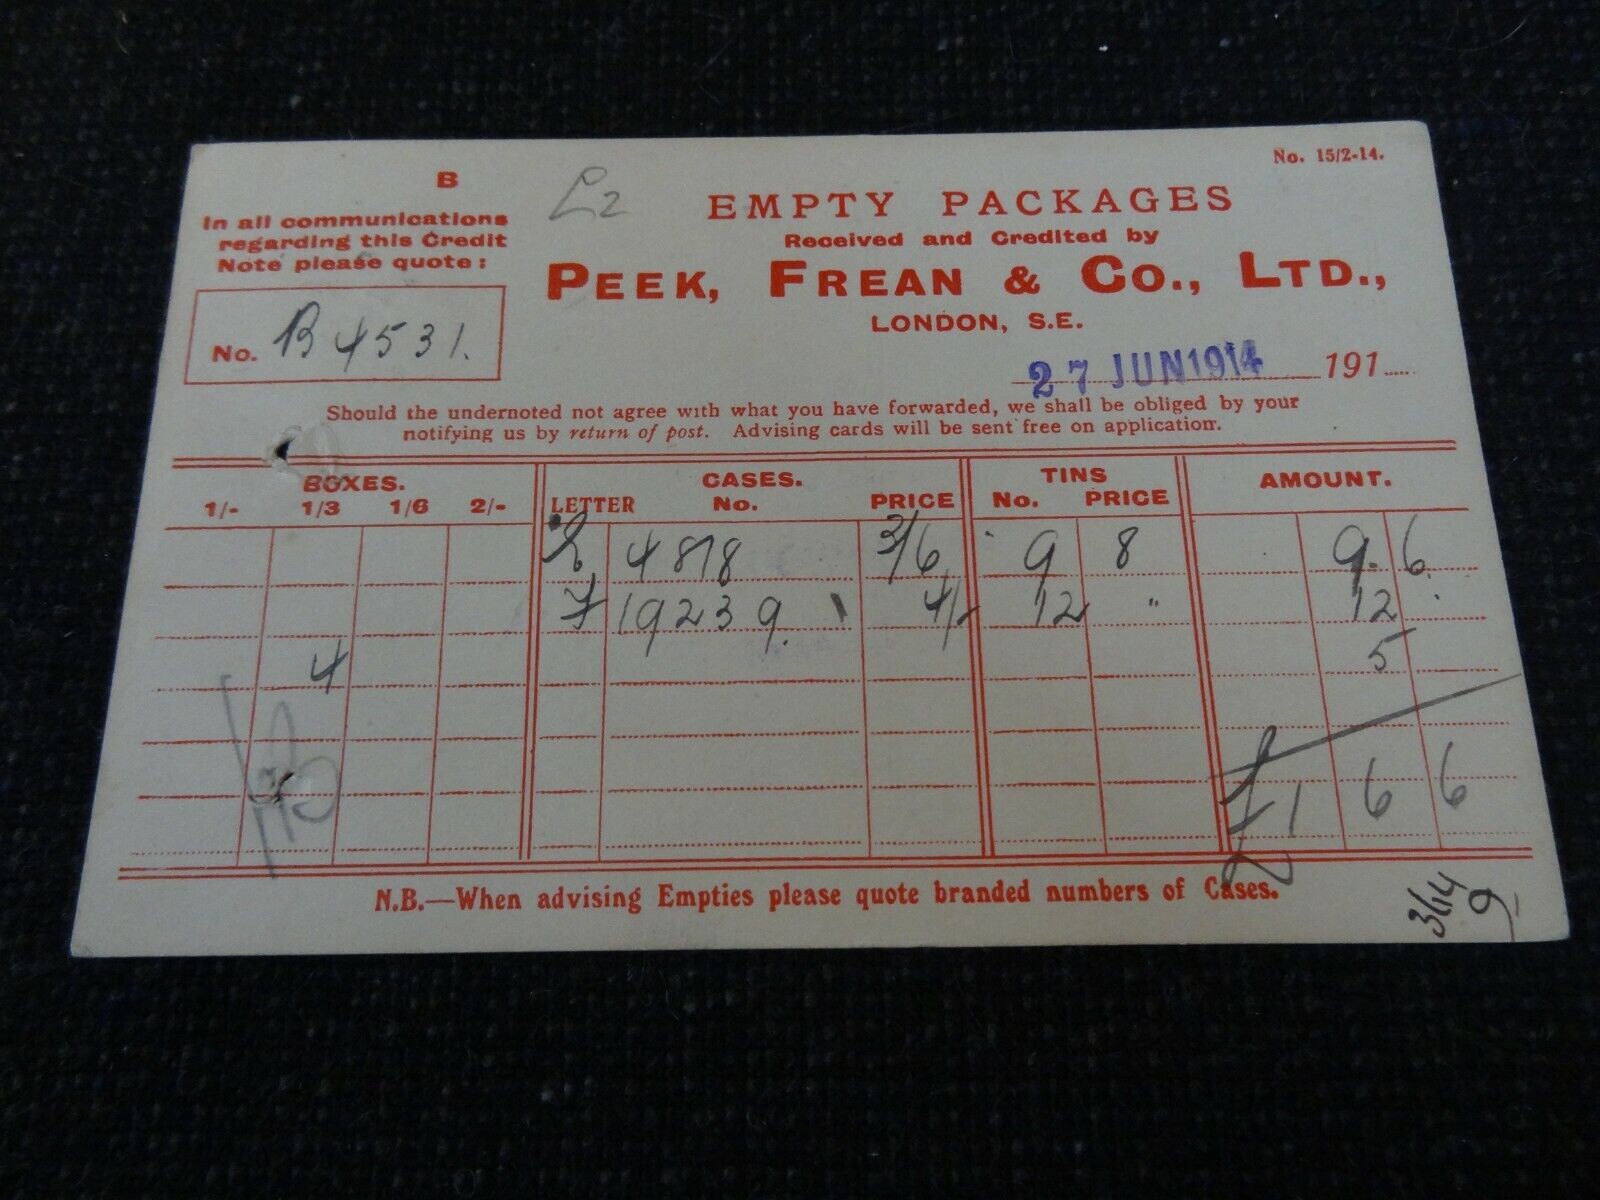 WWI Military Supplies Peak & Frean London Credit Note 27th June 1914 to Commerci